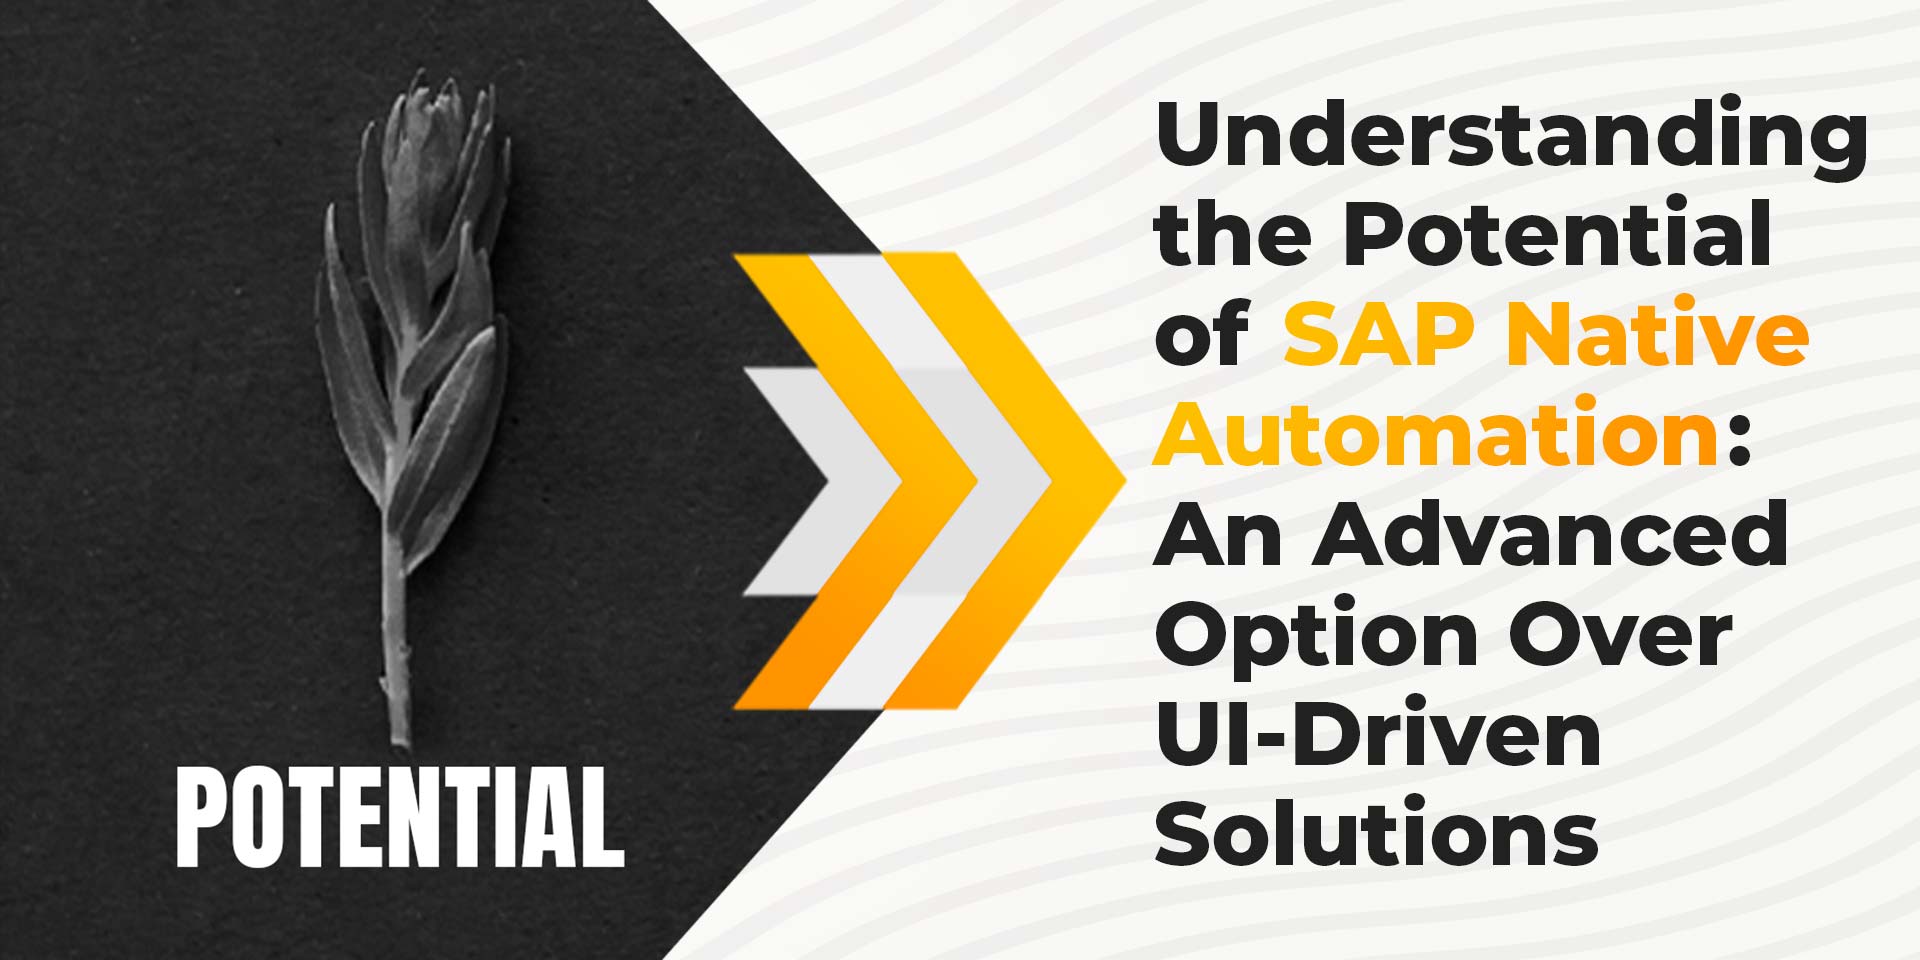 Understanding the Potential of SAP Native Automation- An Advanced Option Over UI-Driven Solutions